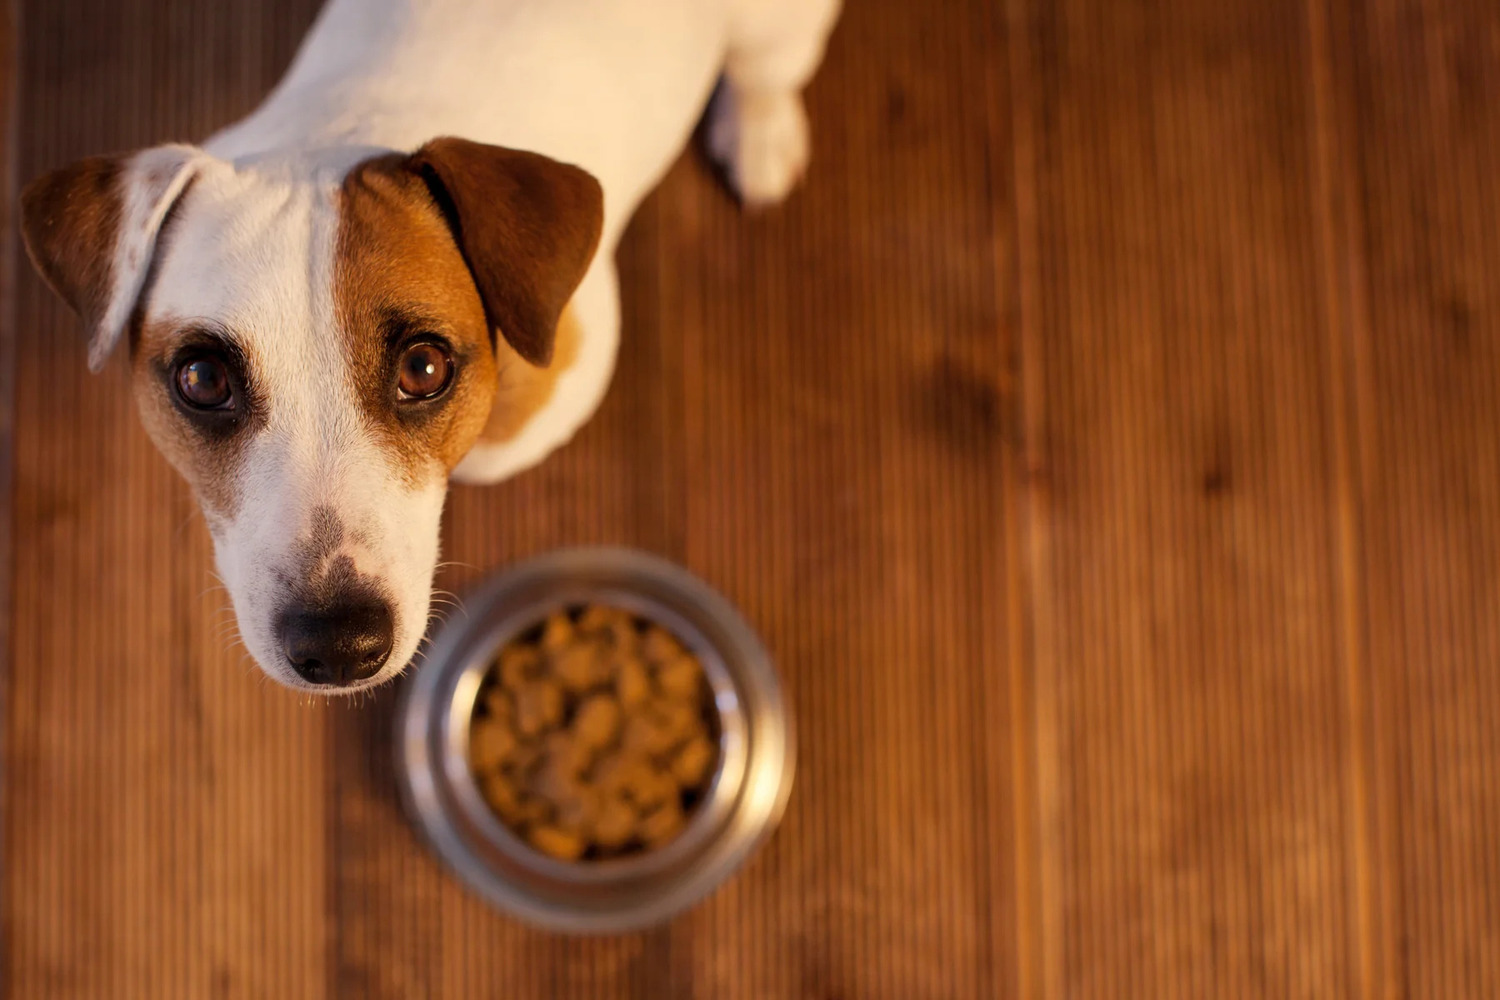 What Should A Diet For A Dog With Cancer Consist Of